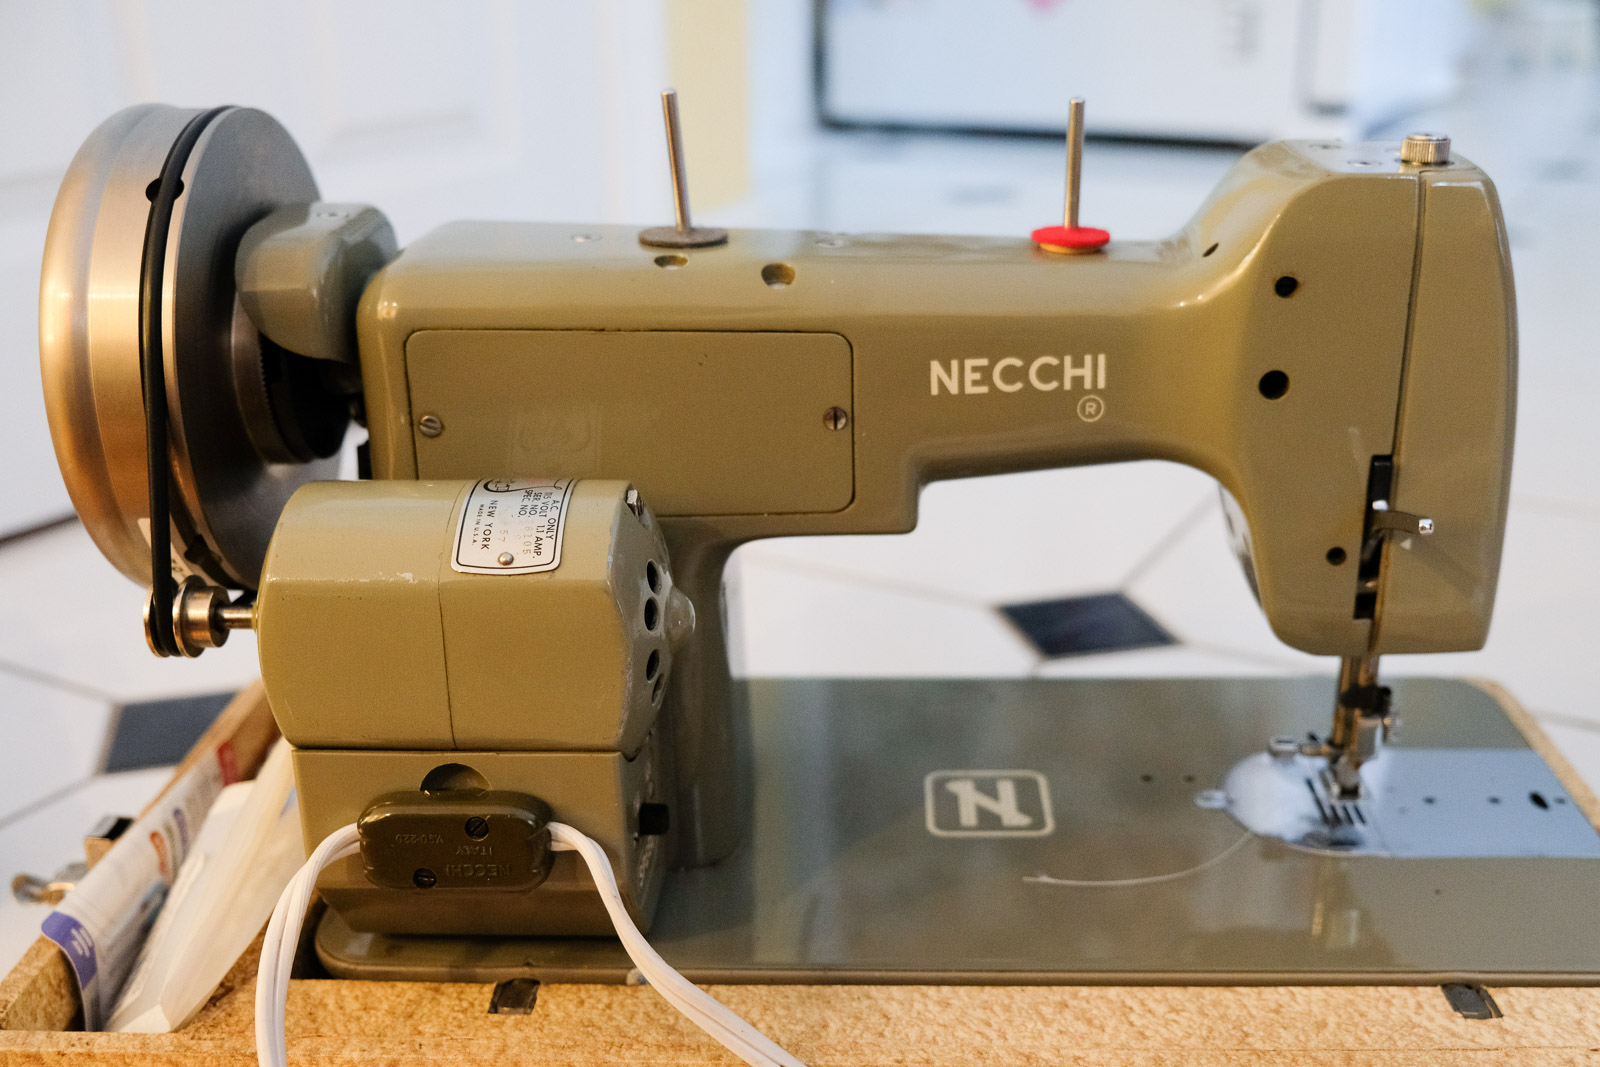 Sewing Machines - Page 3 - Cruisers & Sailing Forums